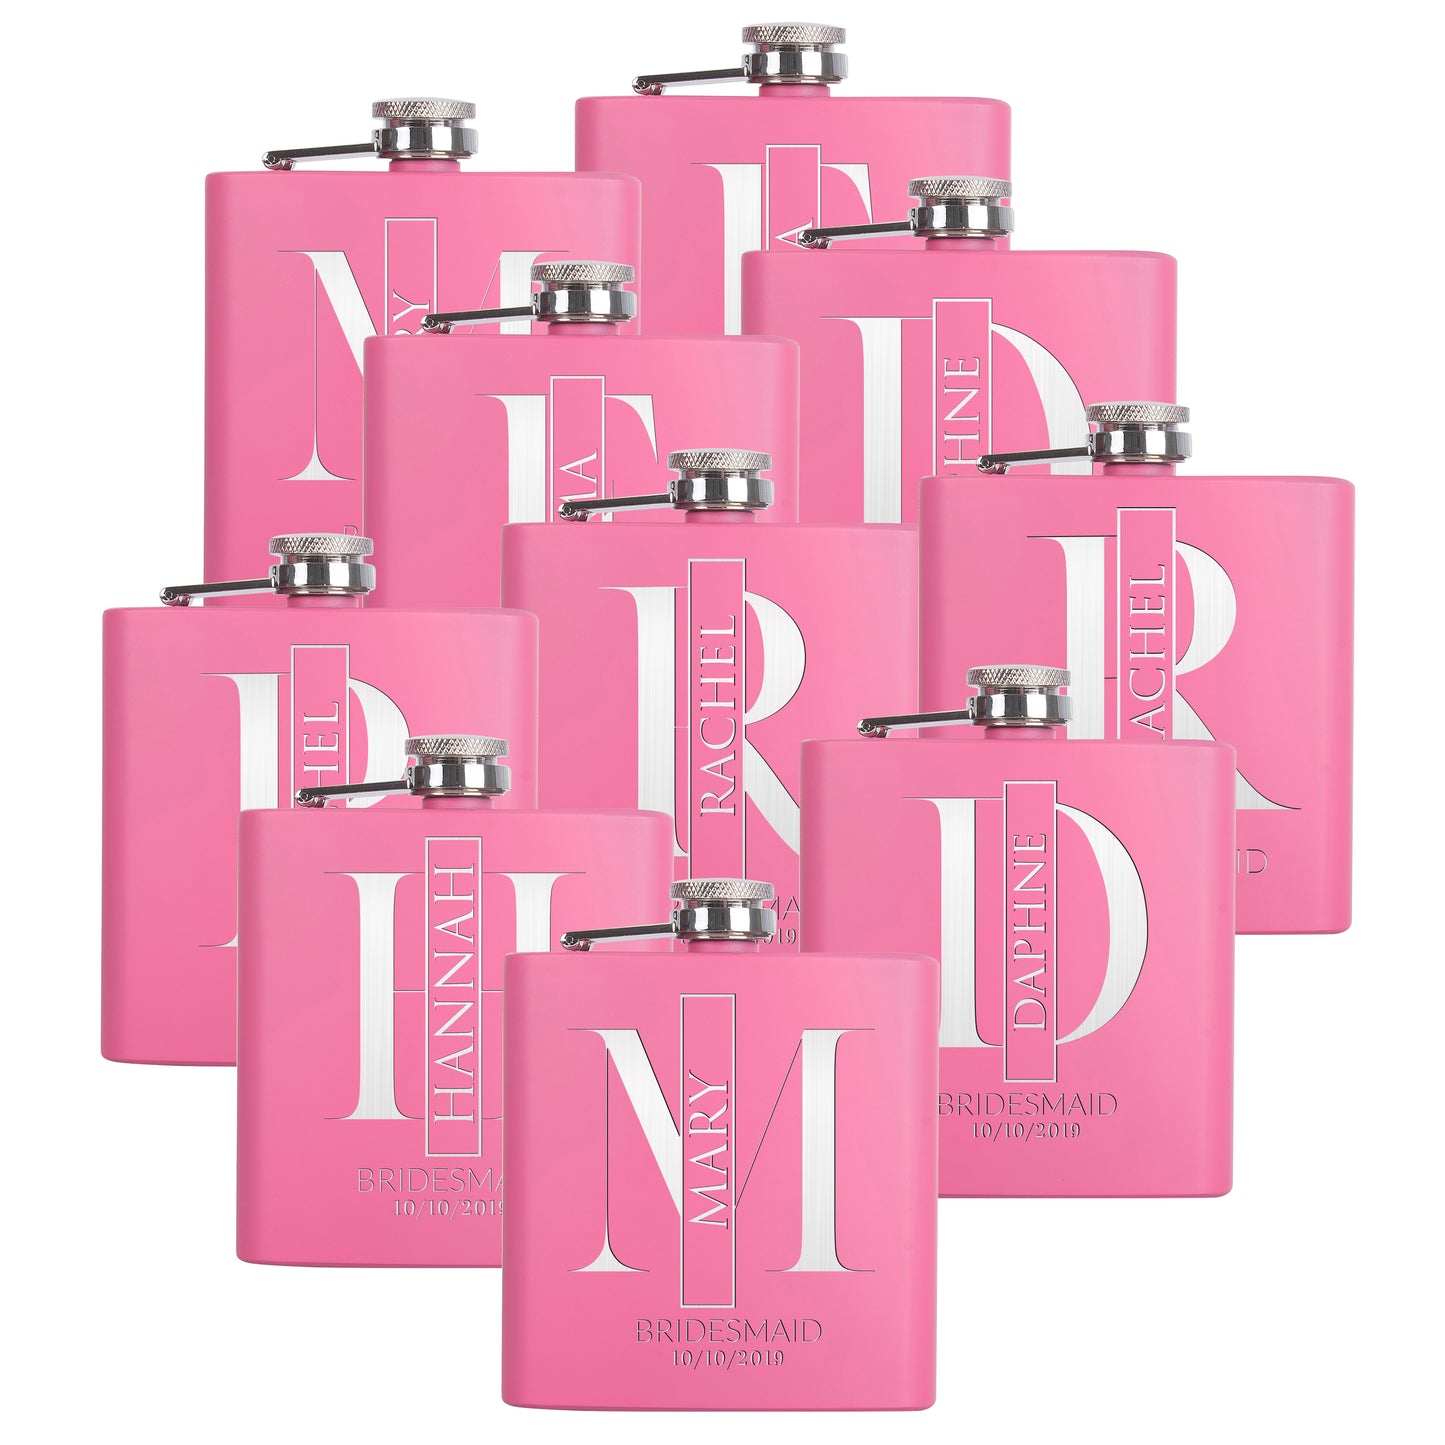 Personalized Pink Flask - Design 5